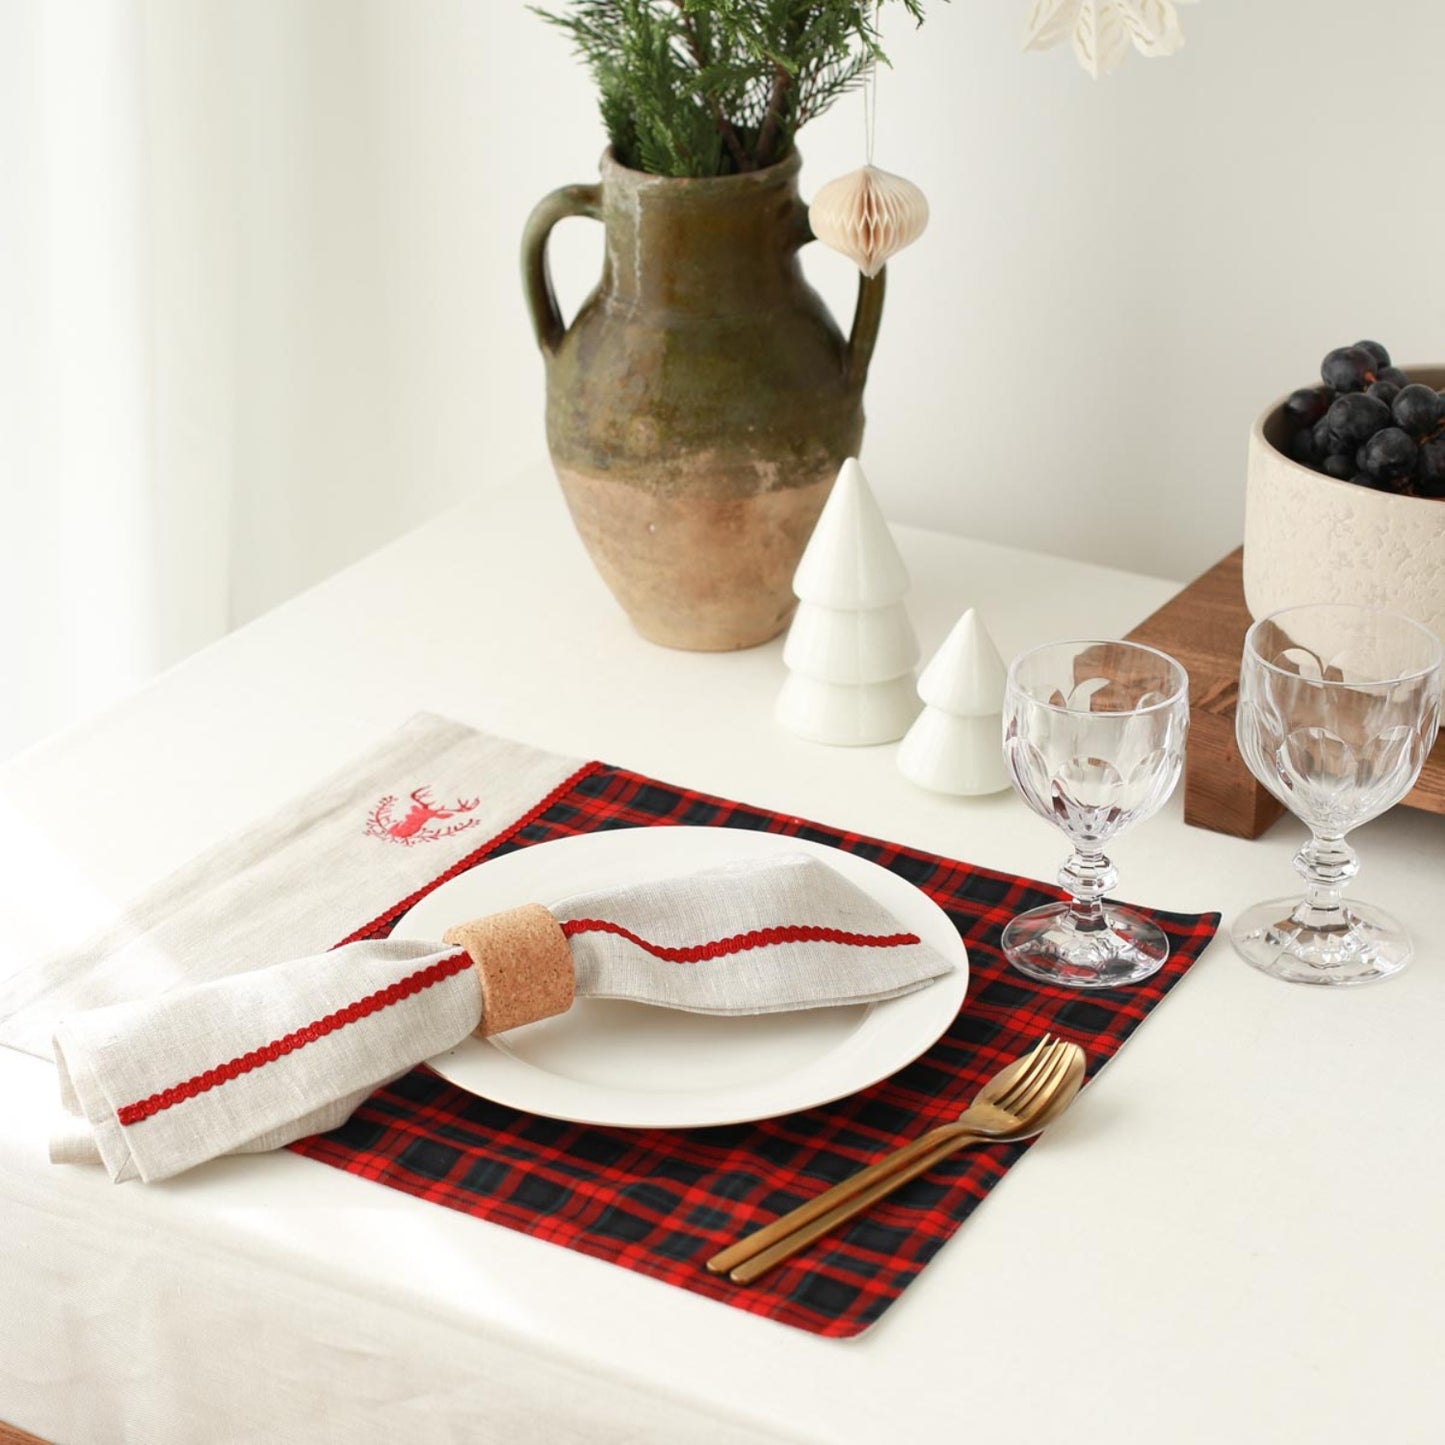 Red Deer Embroidery Tartan Placemat (Set of 2)